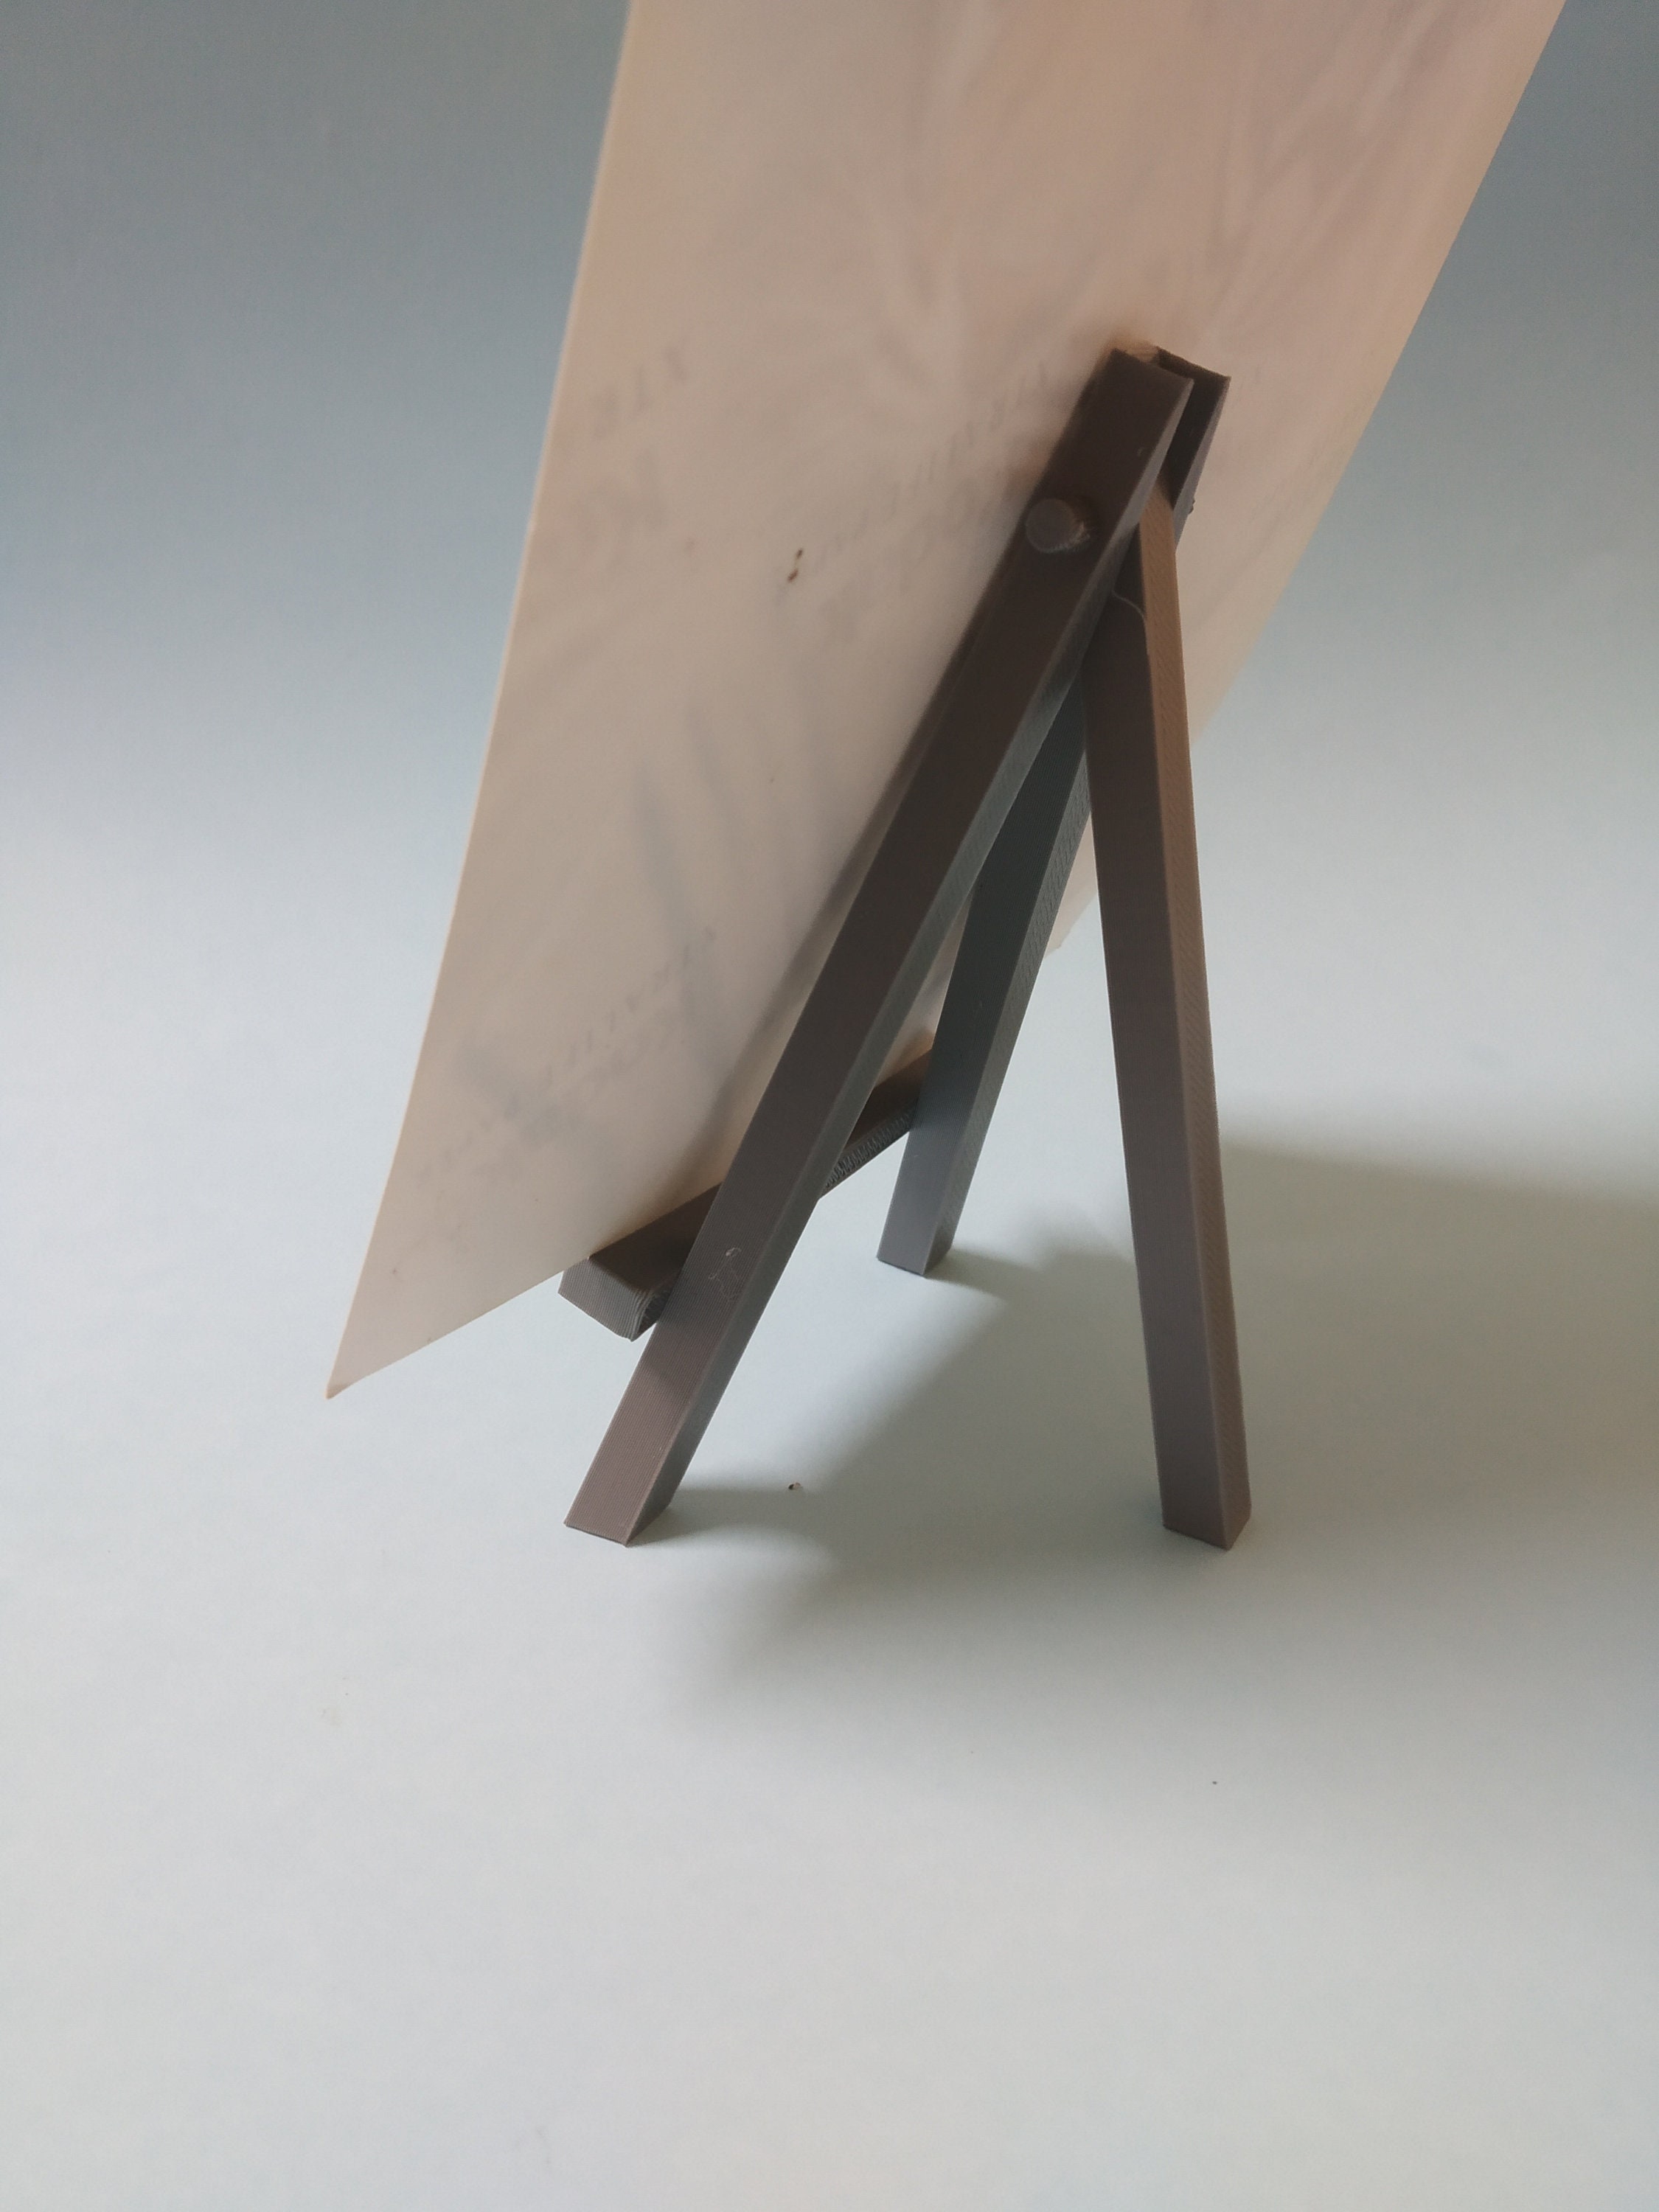 1,439 Small Easel Stand Images, Stock Photos, 3D objects, & Vectors